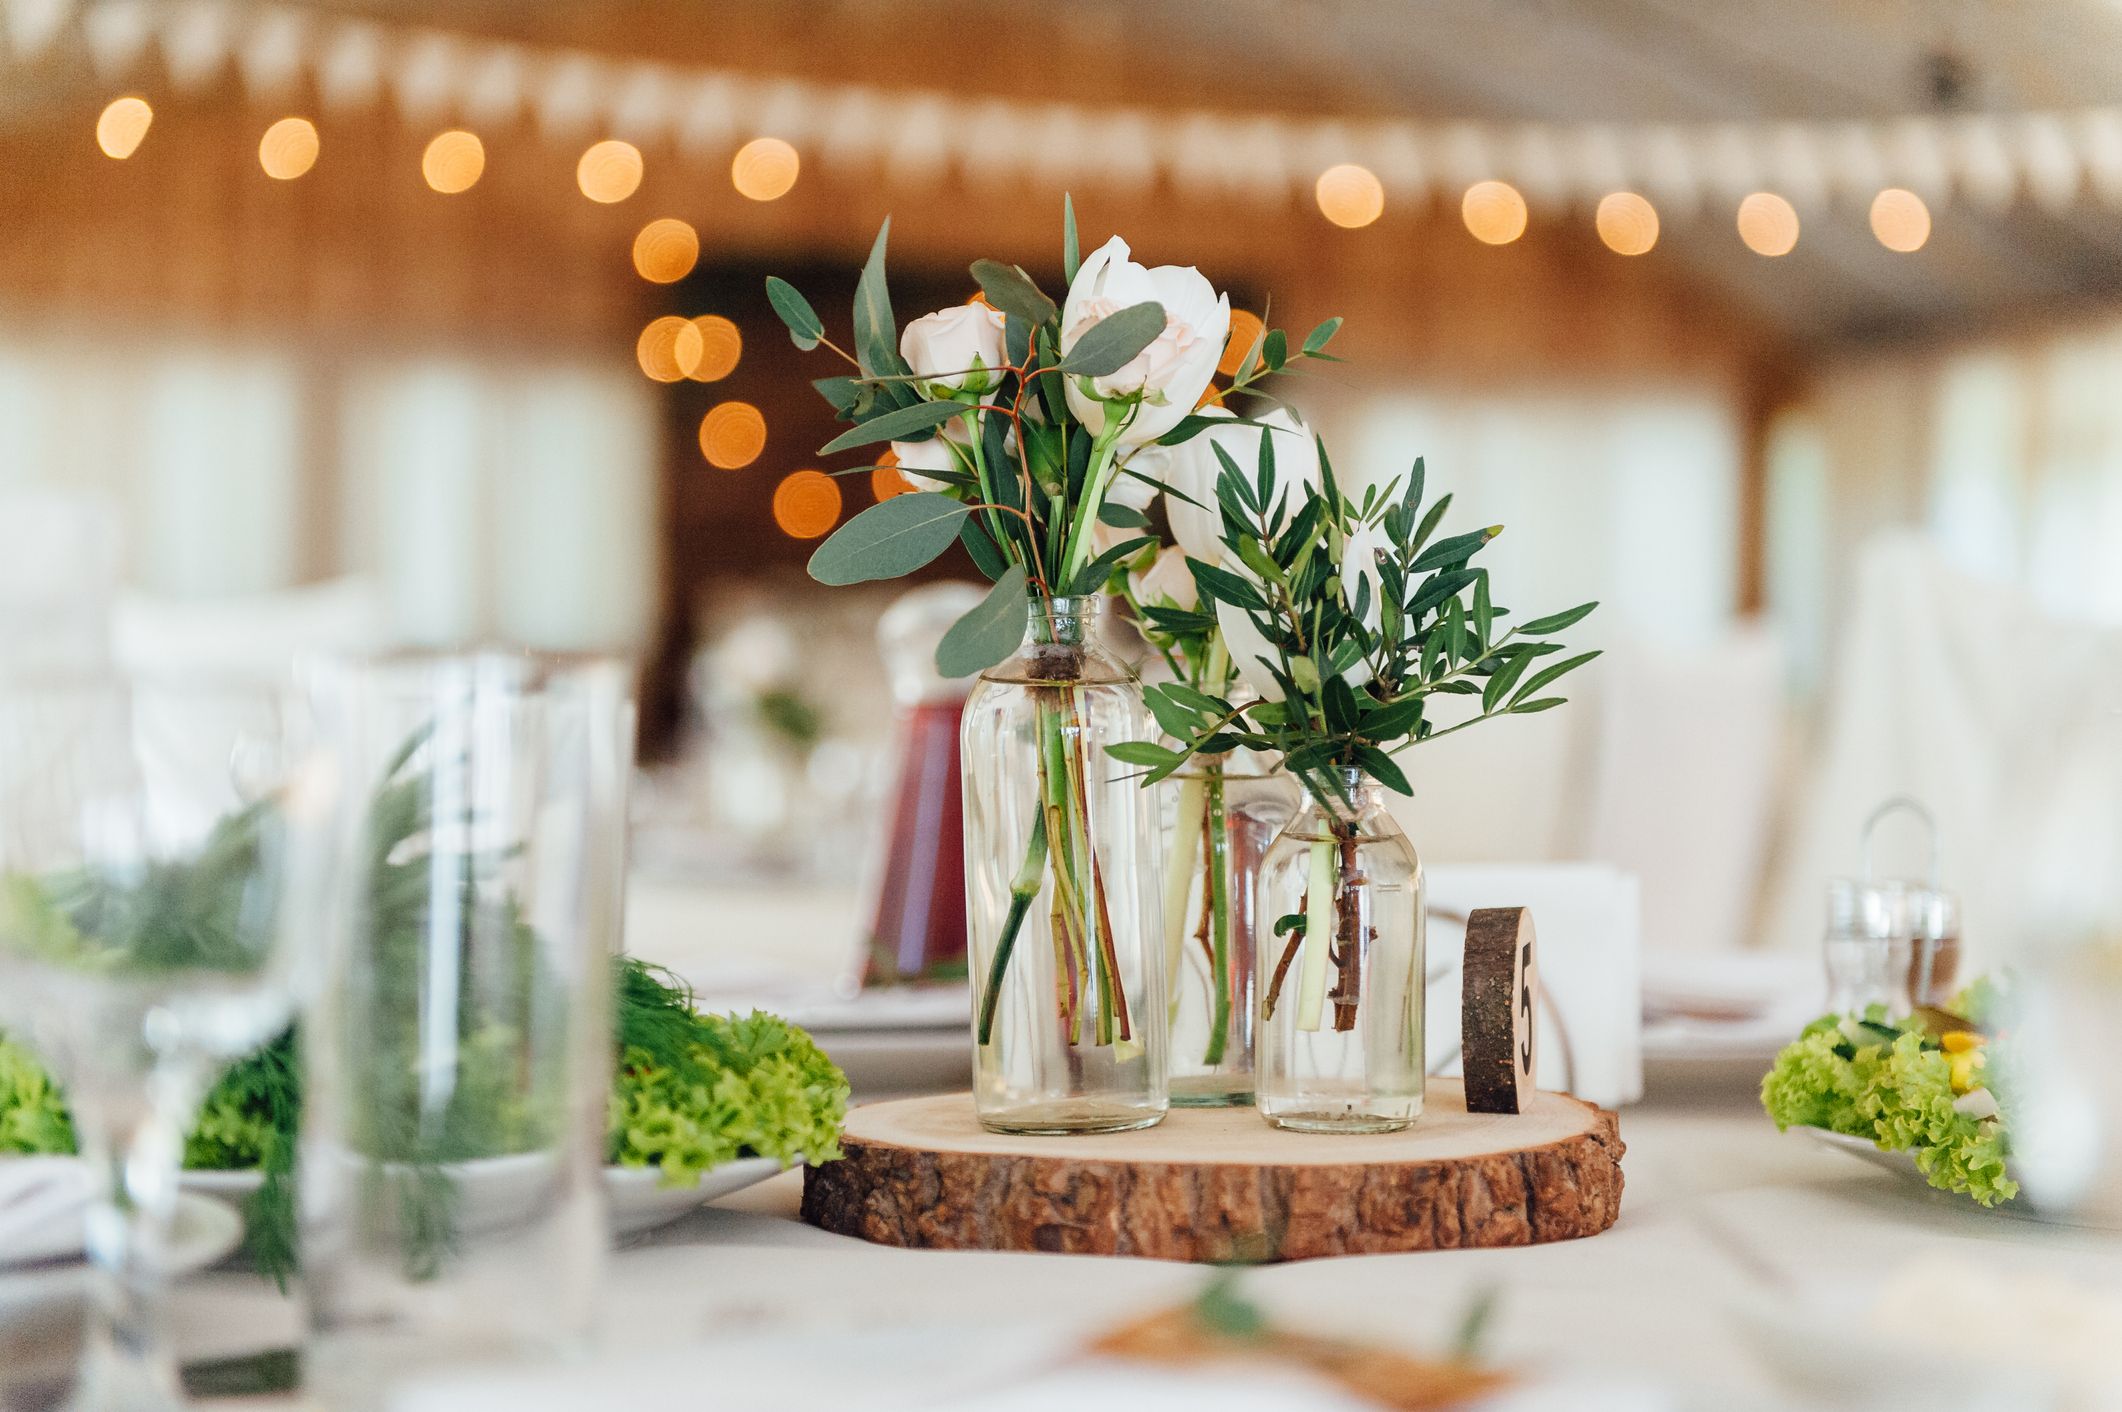 Country & DIY Wedding Ideas - Decorations and Projects for Outdoor